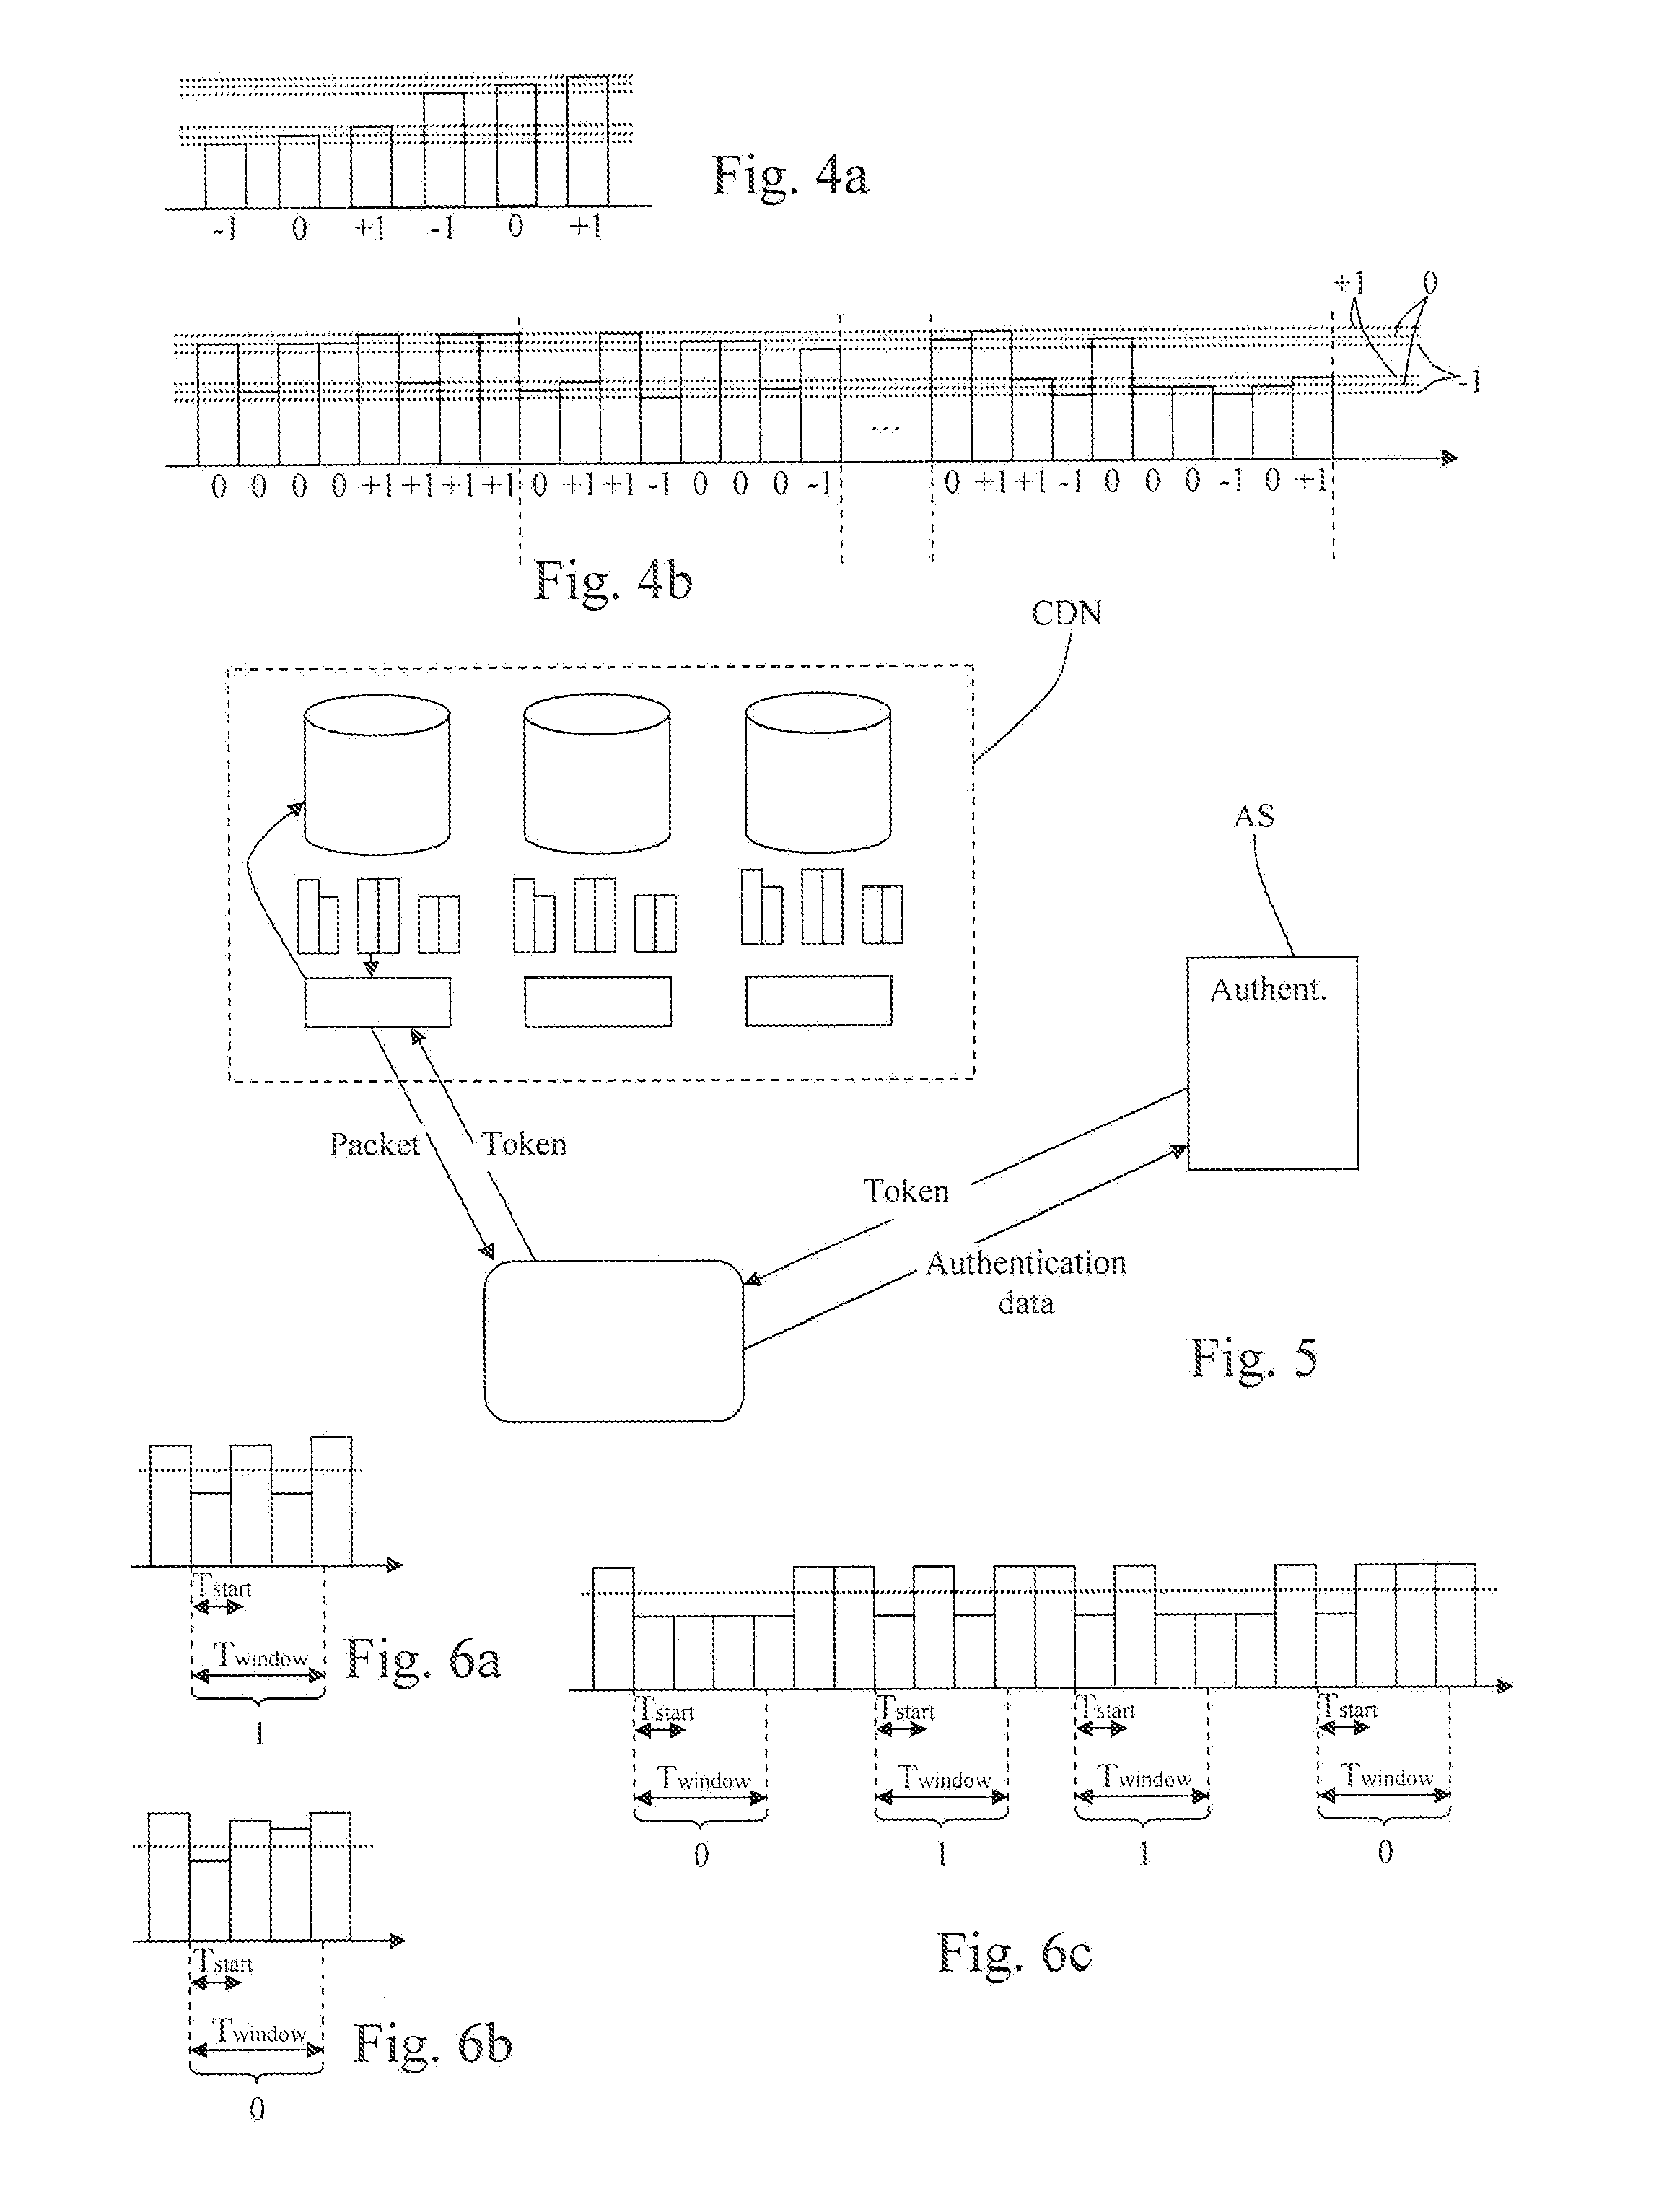 Method for buidling and transmitting a watermarked content, and method for detecting a watermark of said content